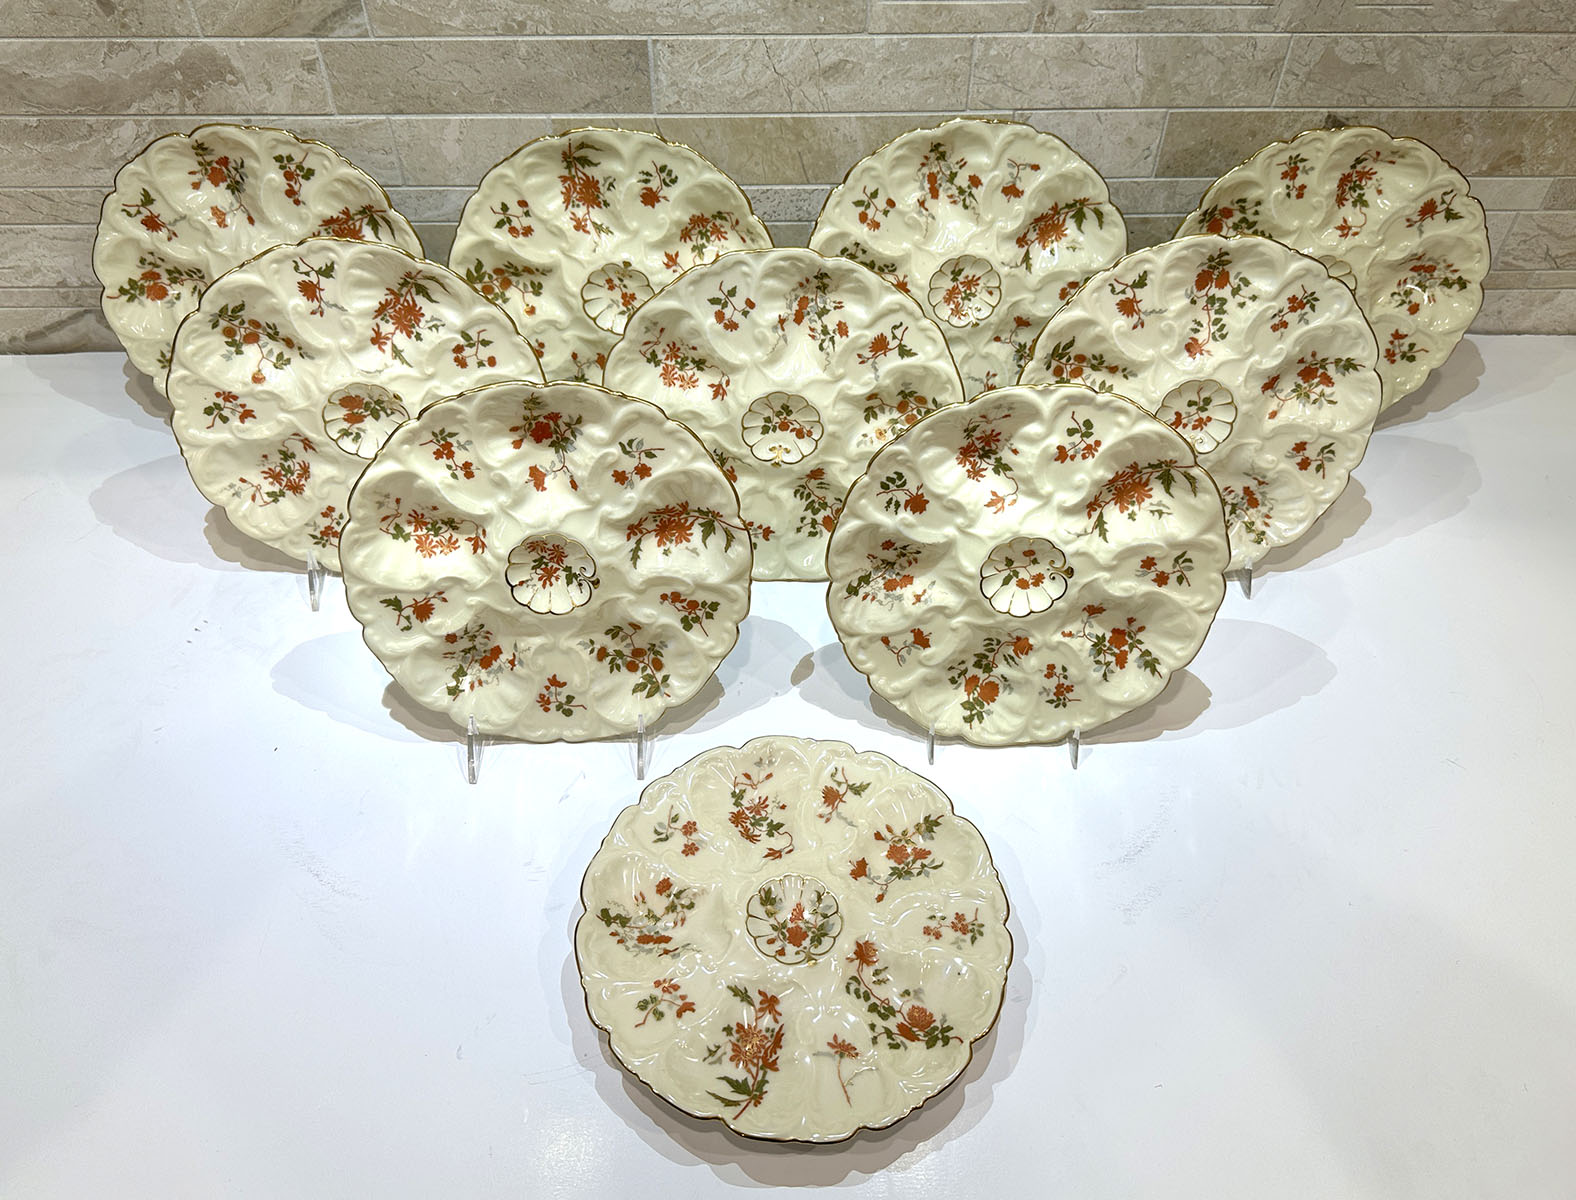 10 PC RB PORCELAIN OYSTER PLATES  2ed2a4